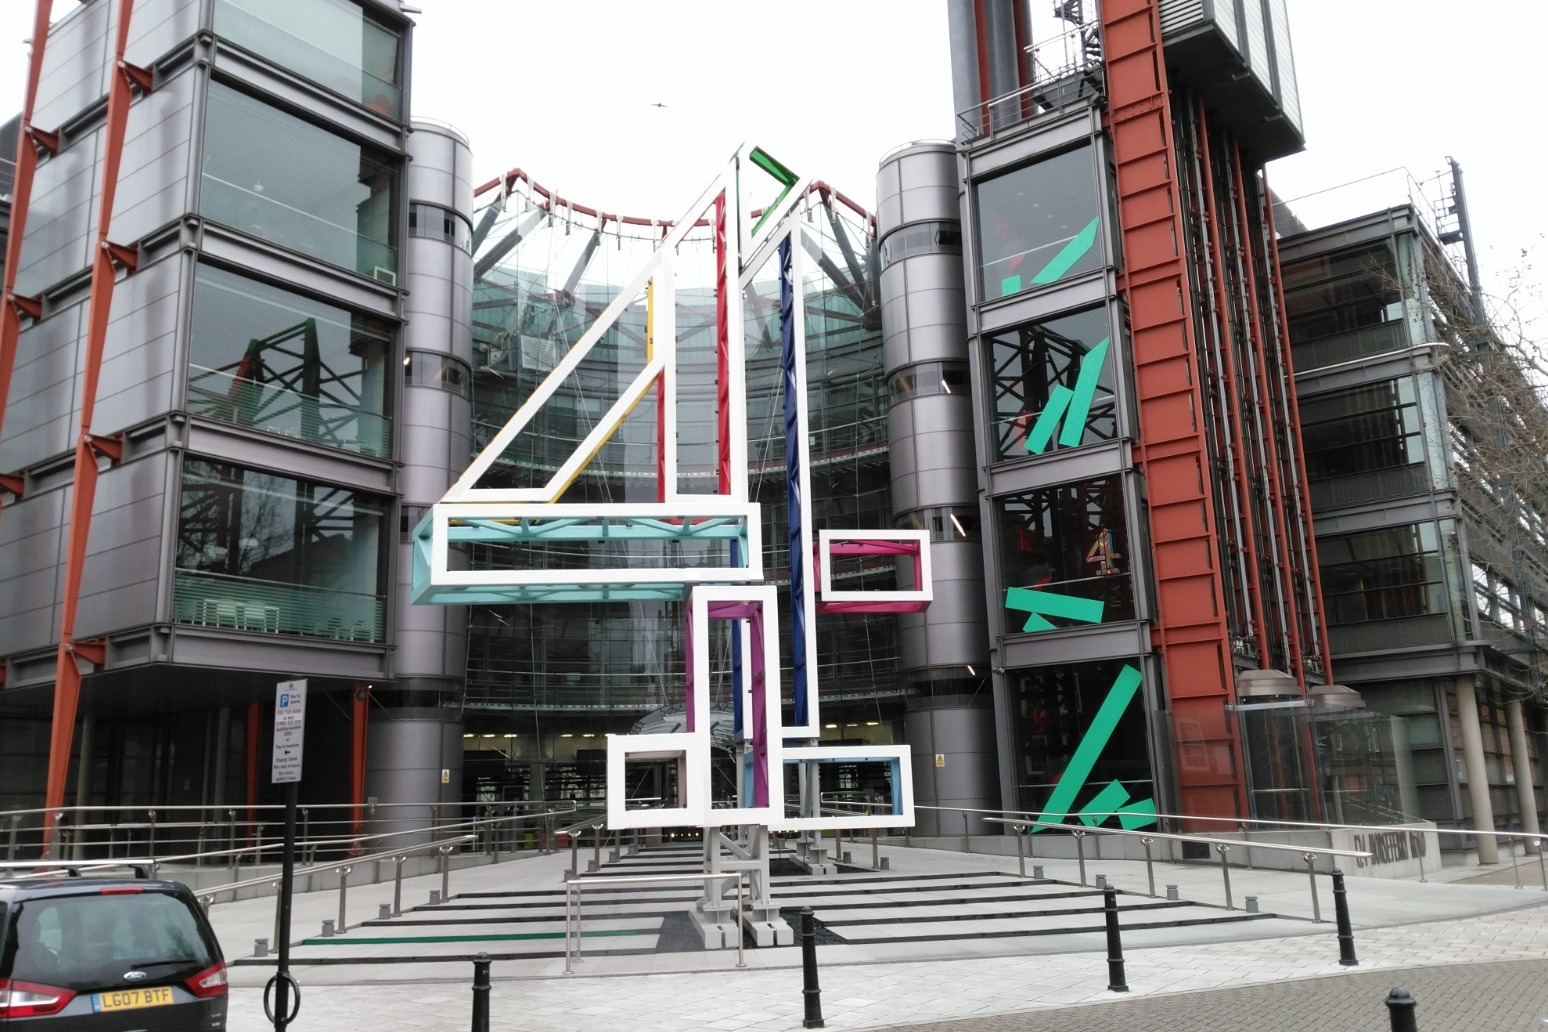 ‘Vital’ that Government plans are ‘rigorously scrutinised’, says Channel 4 boss 